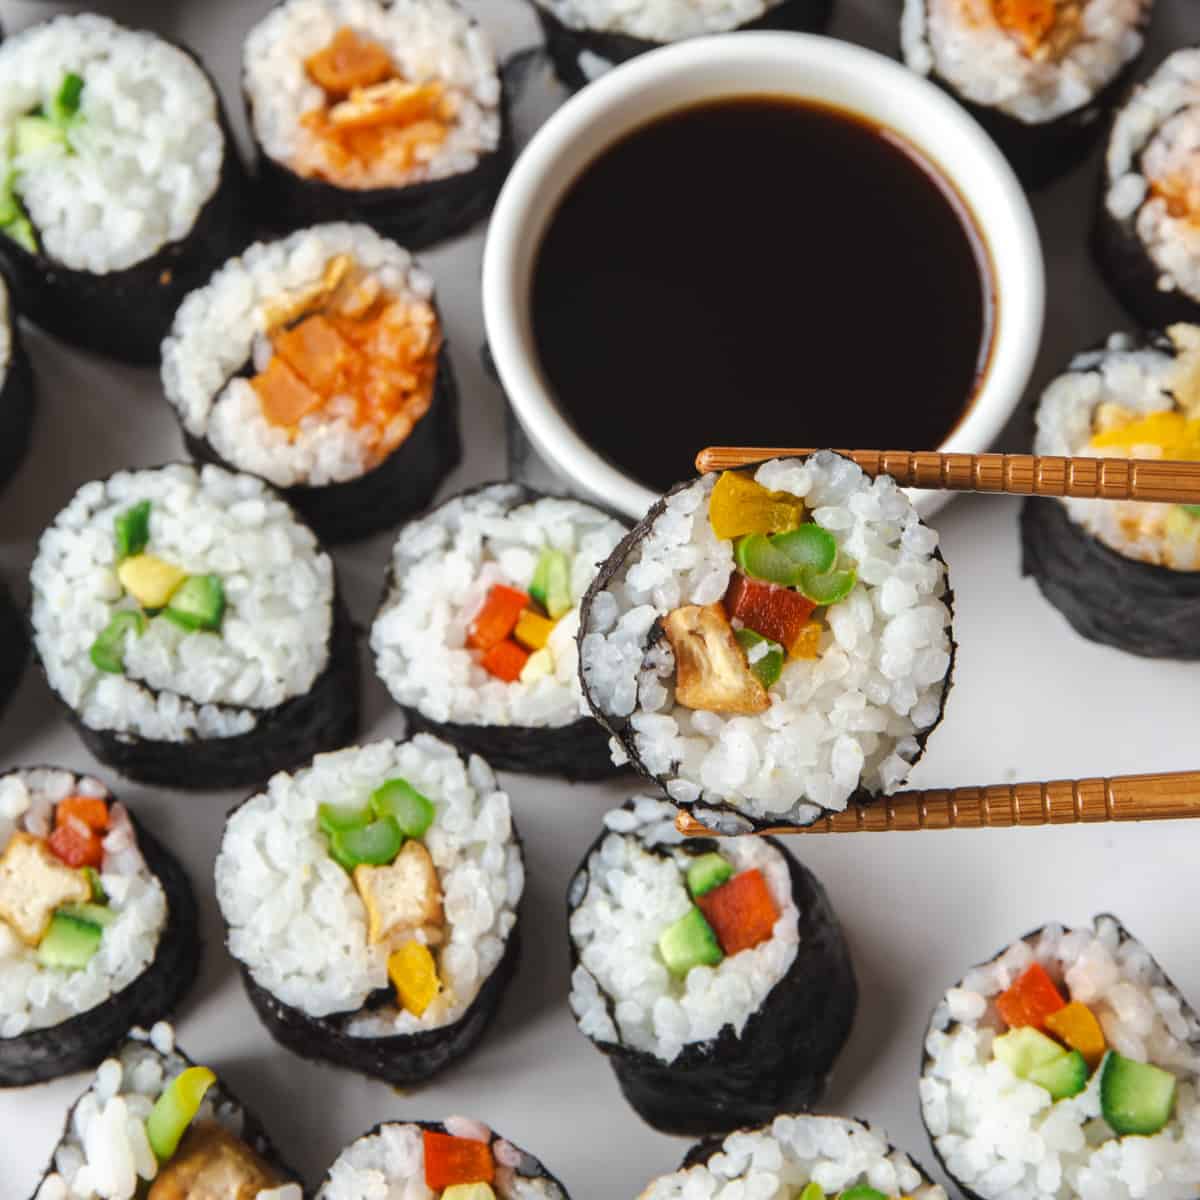 Make Your Own Sushi - Planning With Kids